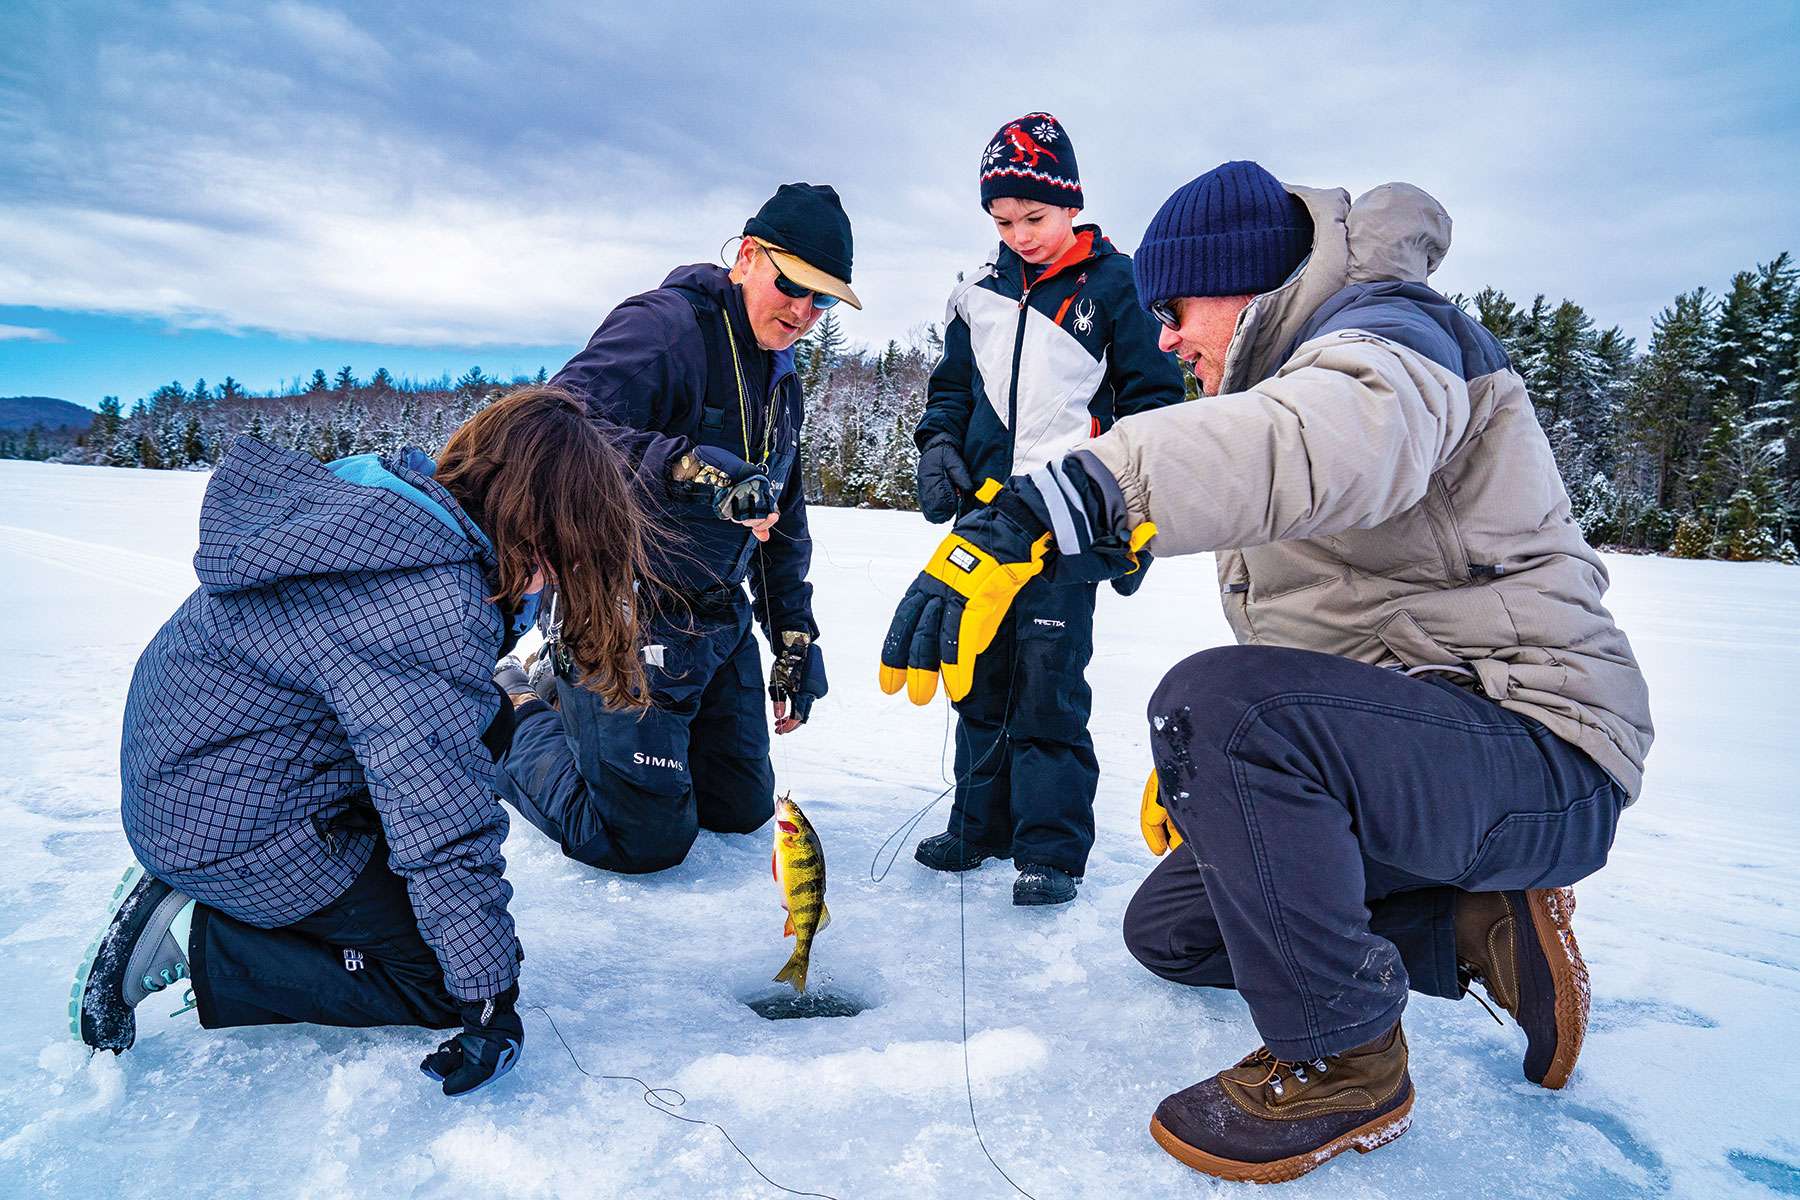 ice fishing: people surrounding a hole in the ice and pulling out a fish